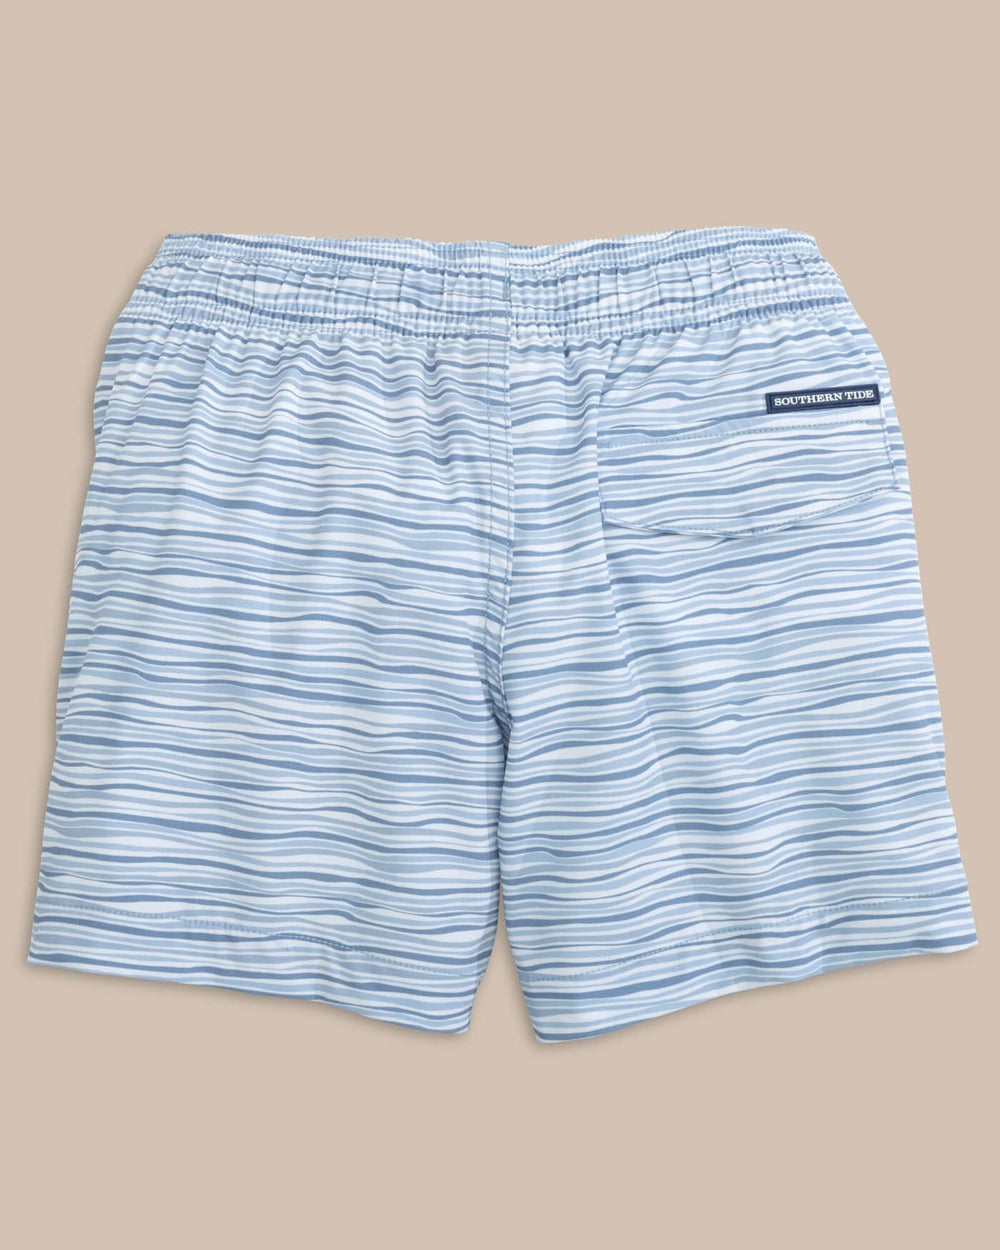 The back view of the Southern Tide Kids Ocean Water Stripe Swim Trunk by Southern Tide - Subdued Blue